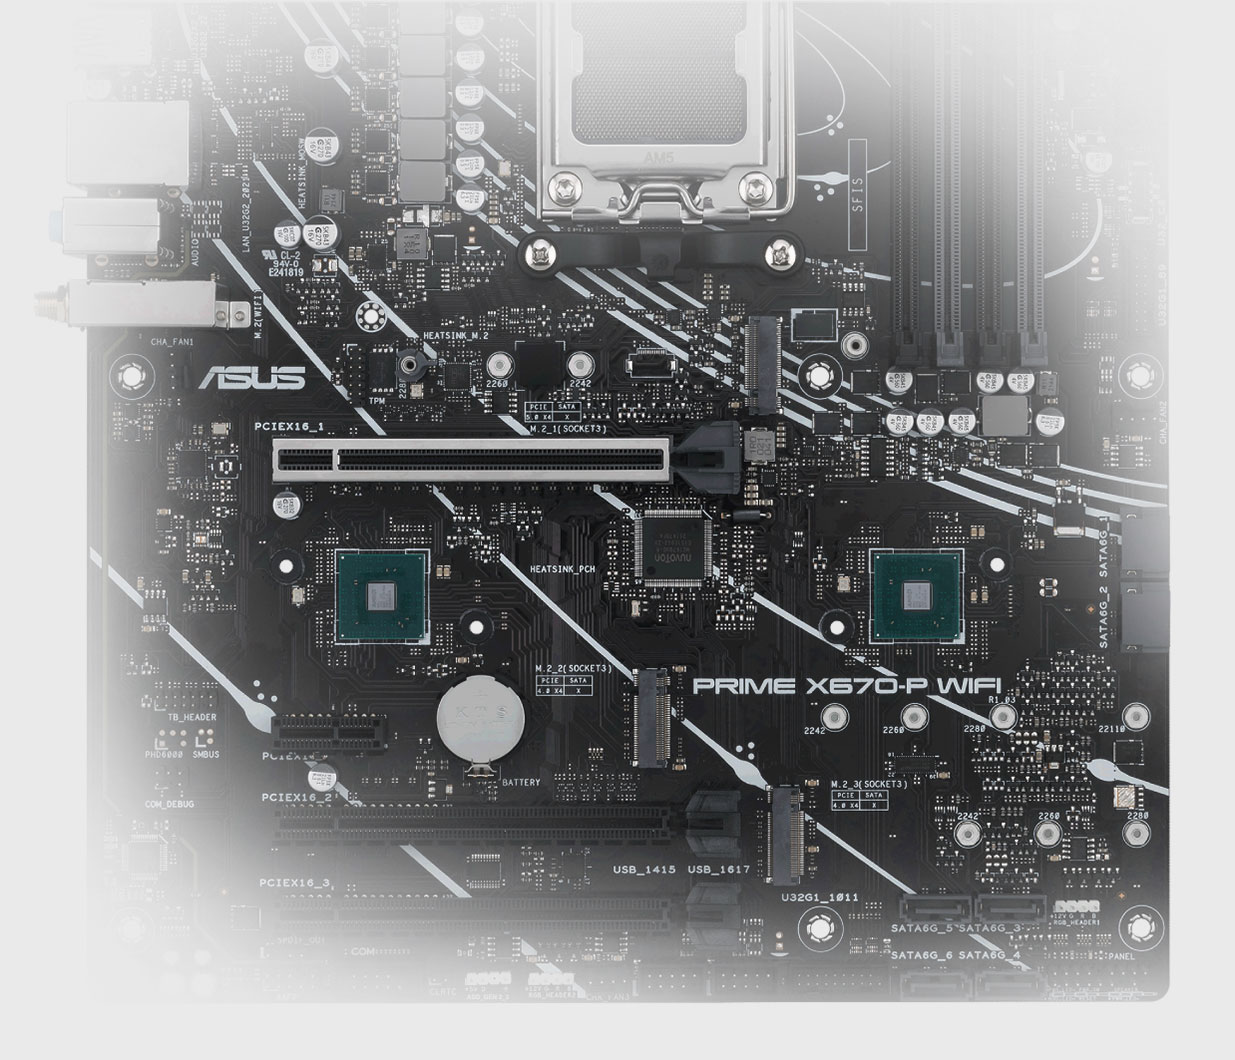 The PRIME X670-P WIFI motherboard supports PCIe 5.0 M.2 Support.